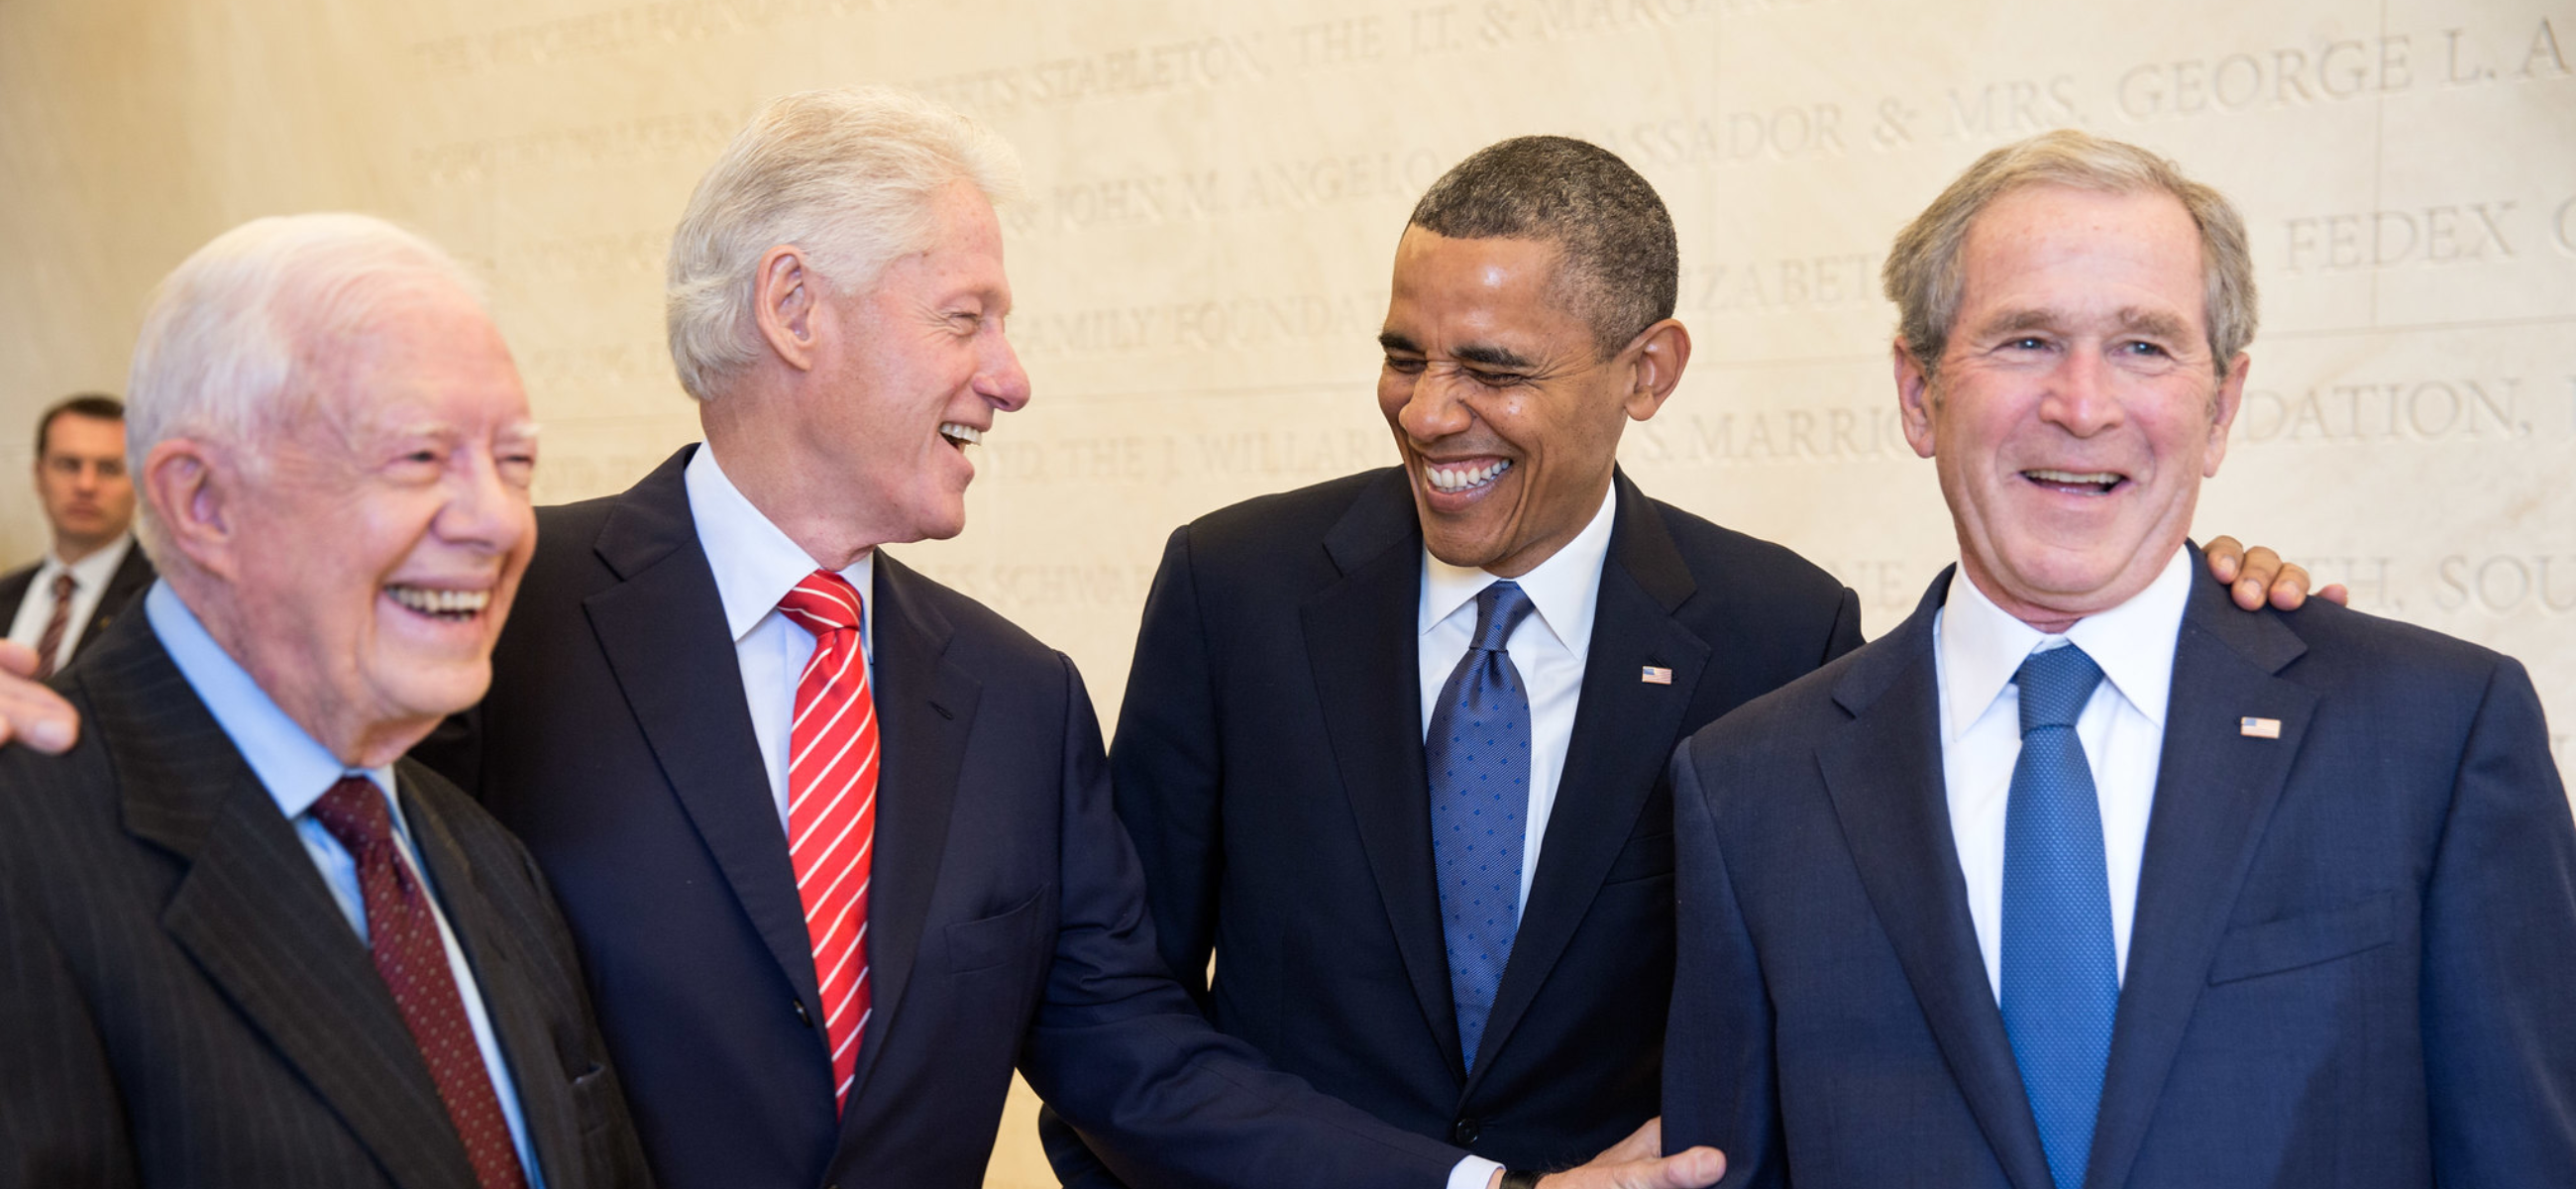 Former Presidents Jimmy Carter (left), Bill Clinton, Barack Obama and George W. Bush sharing a laugh, prior to the dedication of the George W. Bush Presidential Library and Museum on the campus of Southern Methodist University in Dallas, Texas, April 25, 2013. (Official White House Photo by Pete Souza)